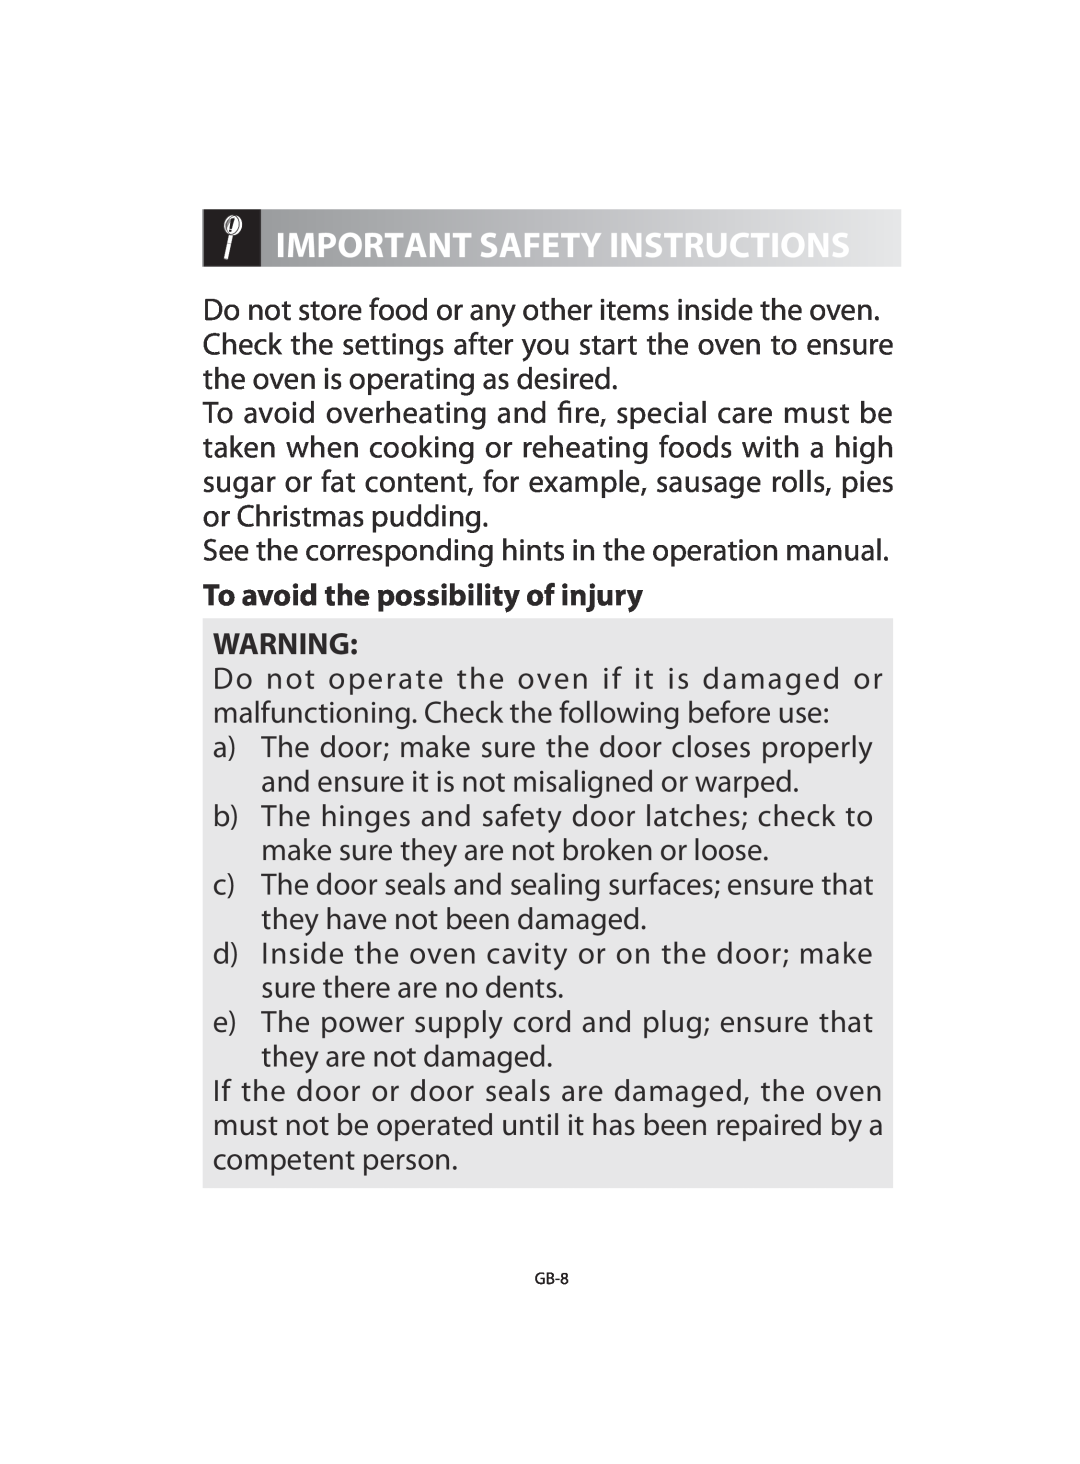 Sharp R-92STM operation manual To avoid the possibility of injury, Important Safety Instructions 